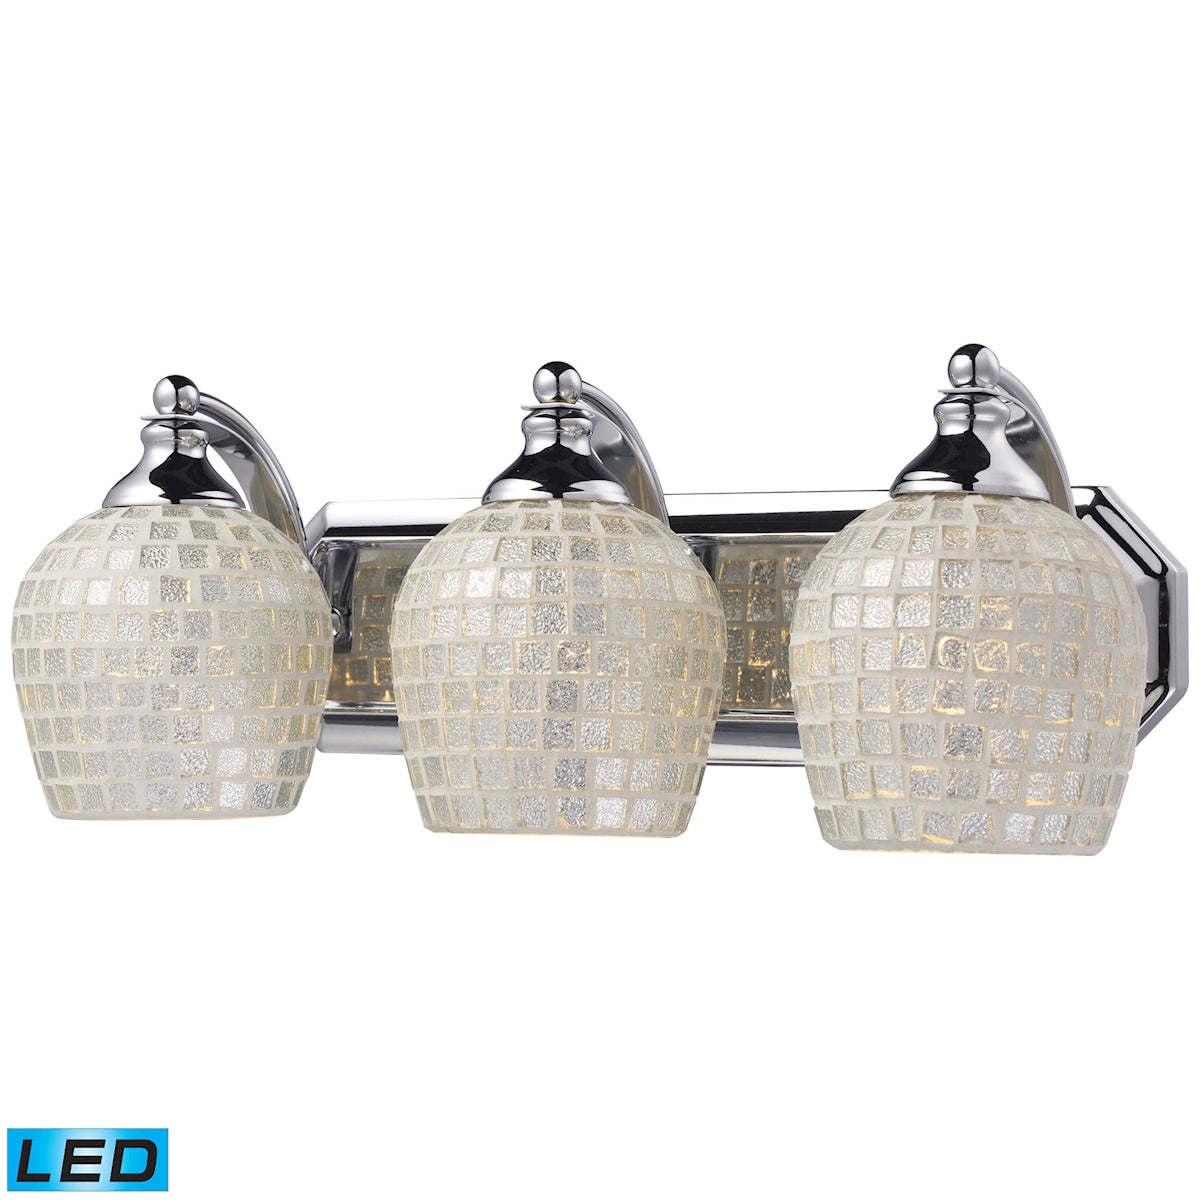 ELK Lighting 570-3C-SLV-LED Mix and Match Vanity 3-Light Wall Lamp in Chrome with Silver Glass - Includes LED Bulbs